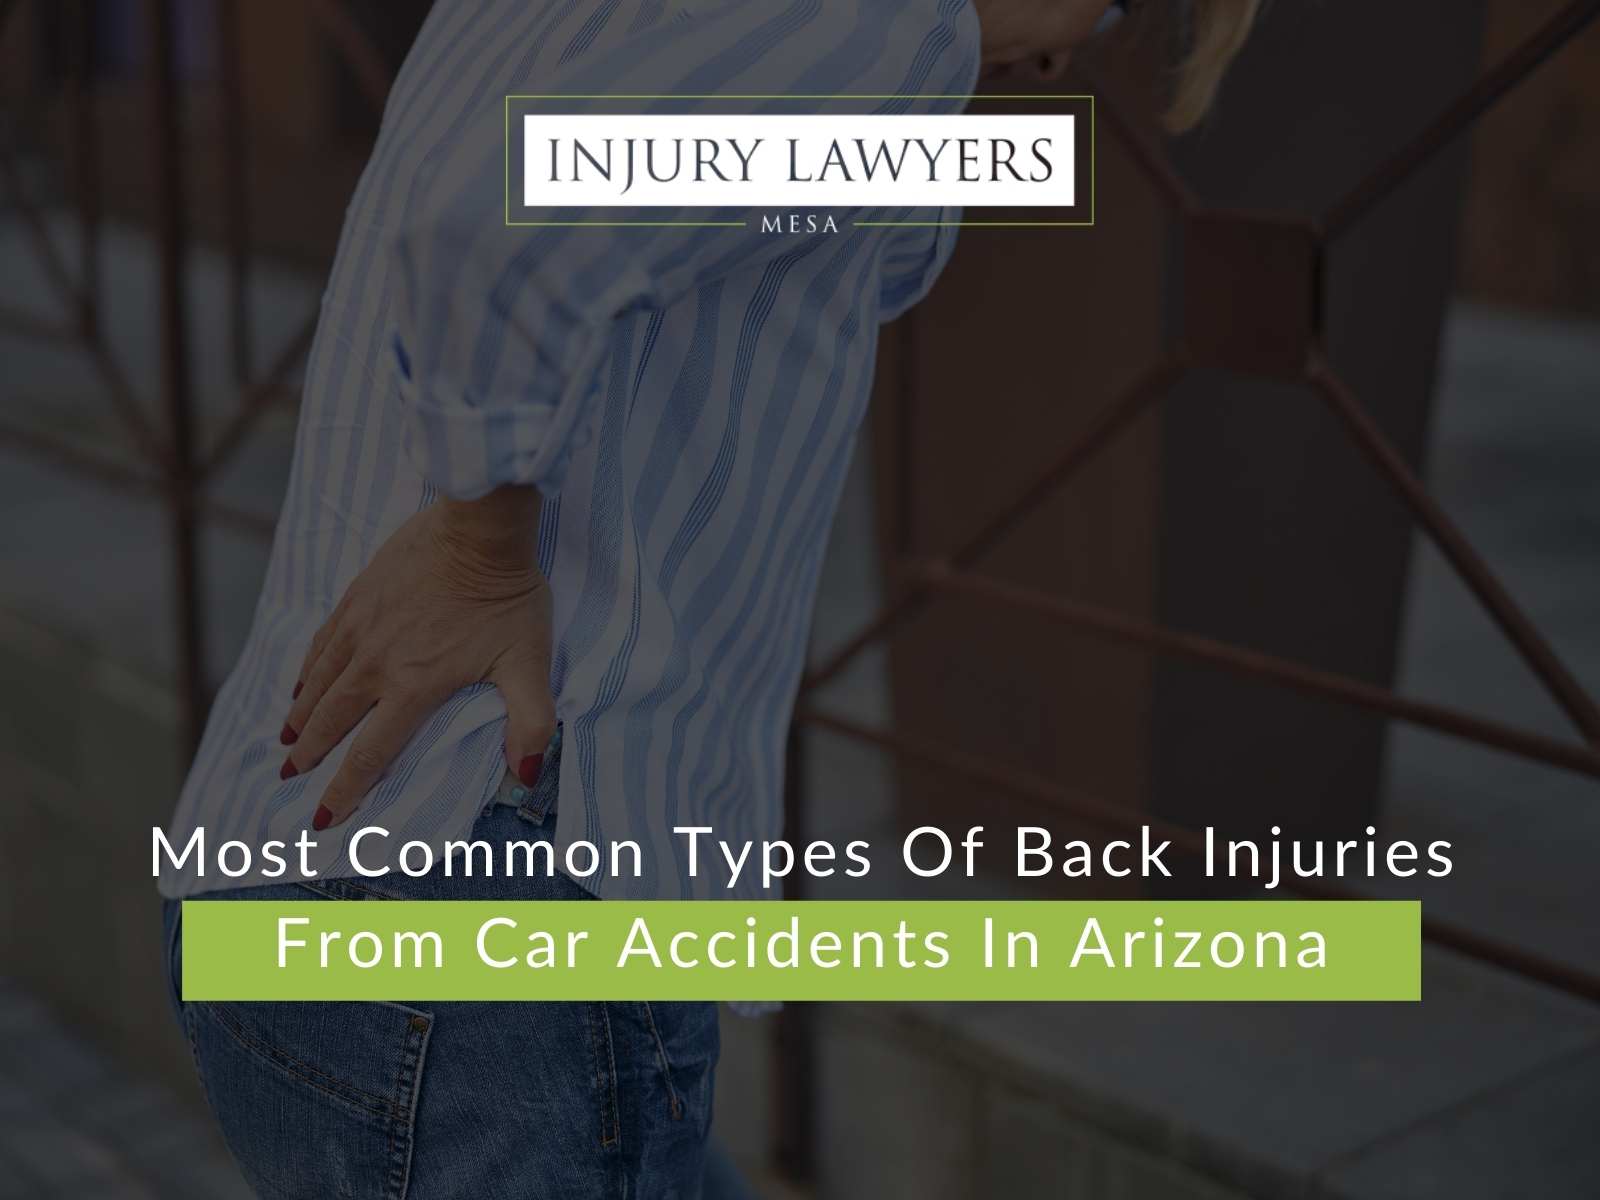 Most Common Types Of Back Injuries From Car Accidents In Arizona